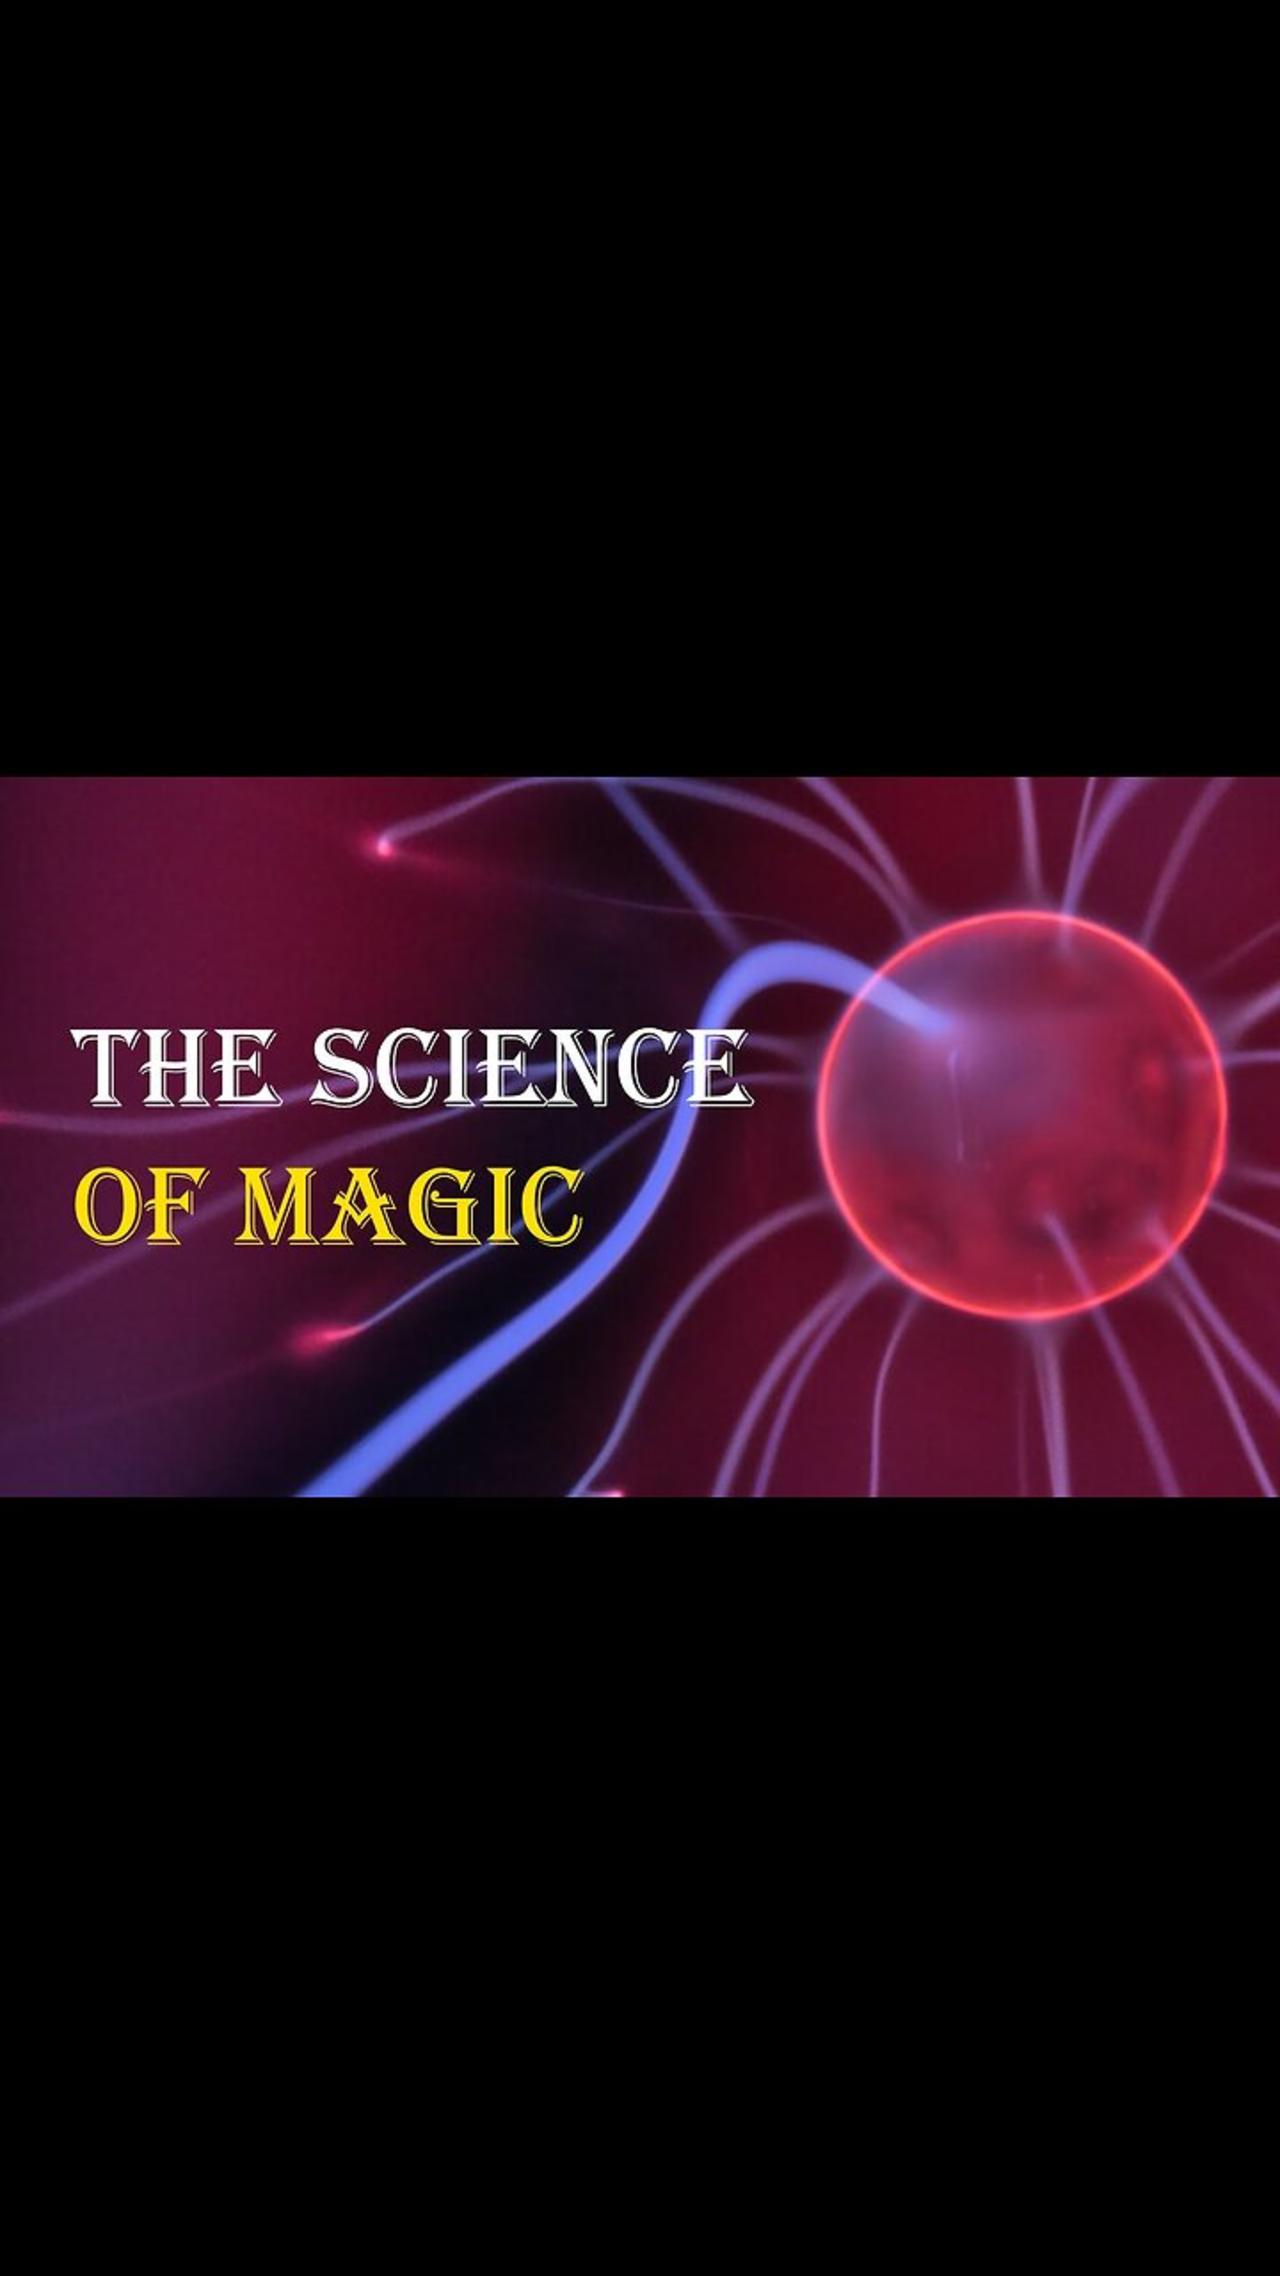 Megic of Science You can,t believe